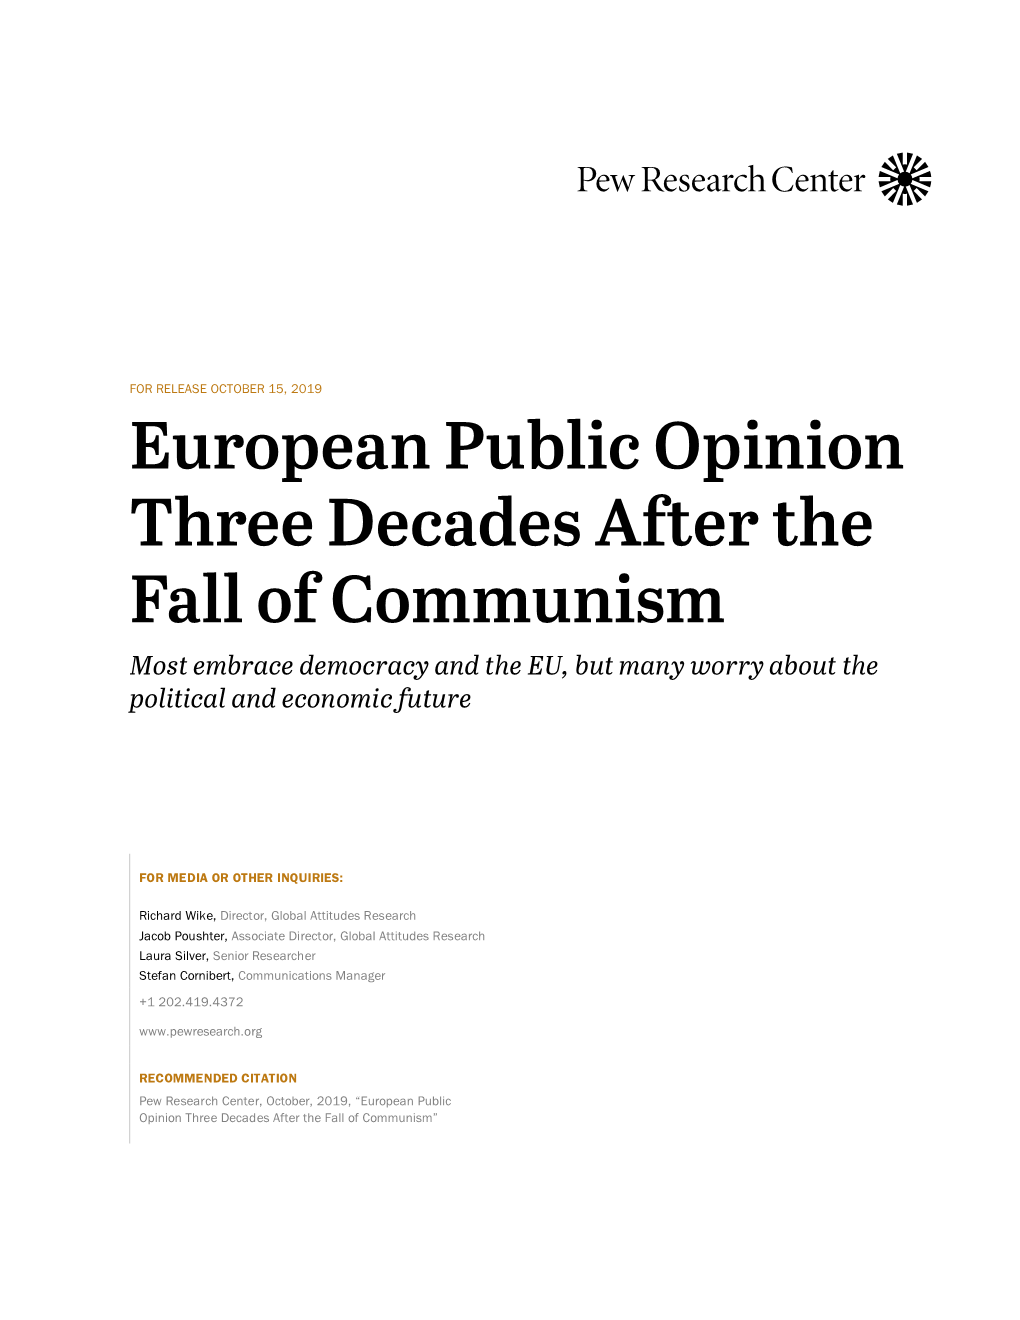 European Public Opinion Three Decades After the Fall of Communism Most Embrace Democracy and the EU, but Many Worry About the Political and Economic Future